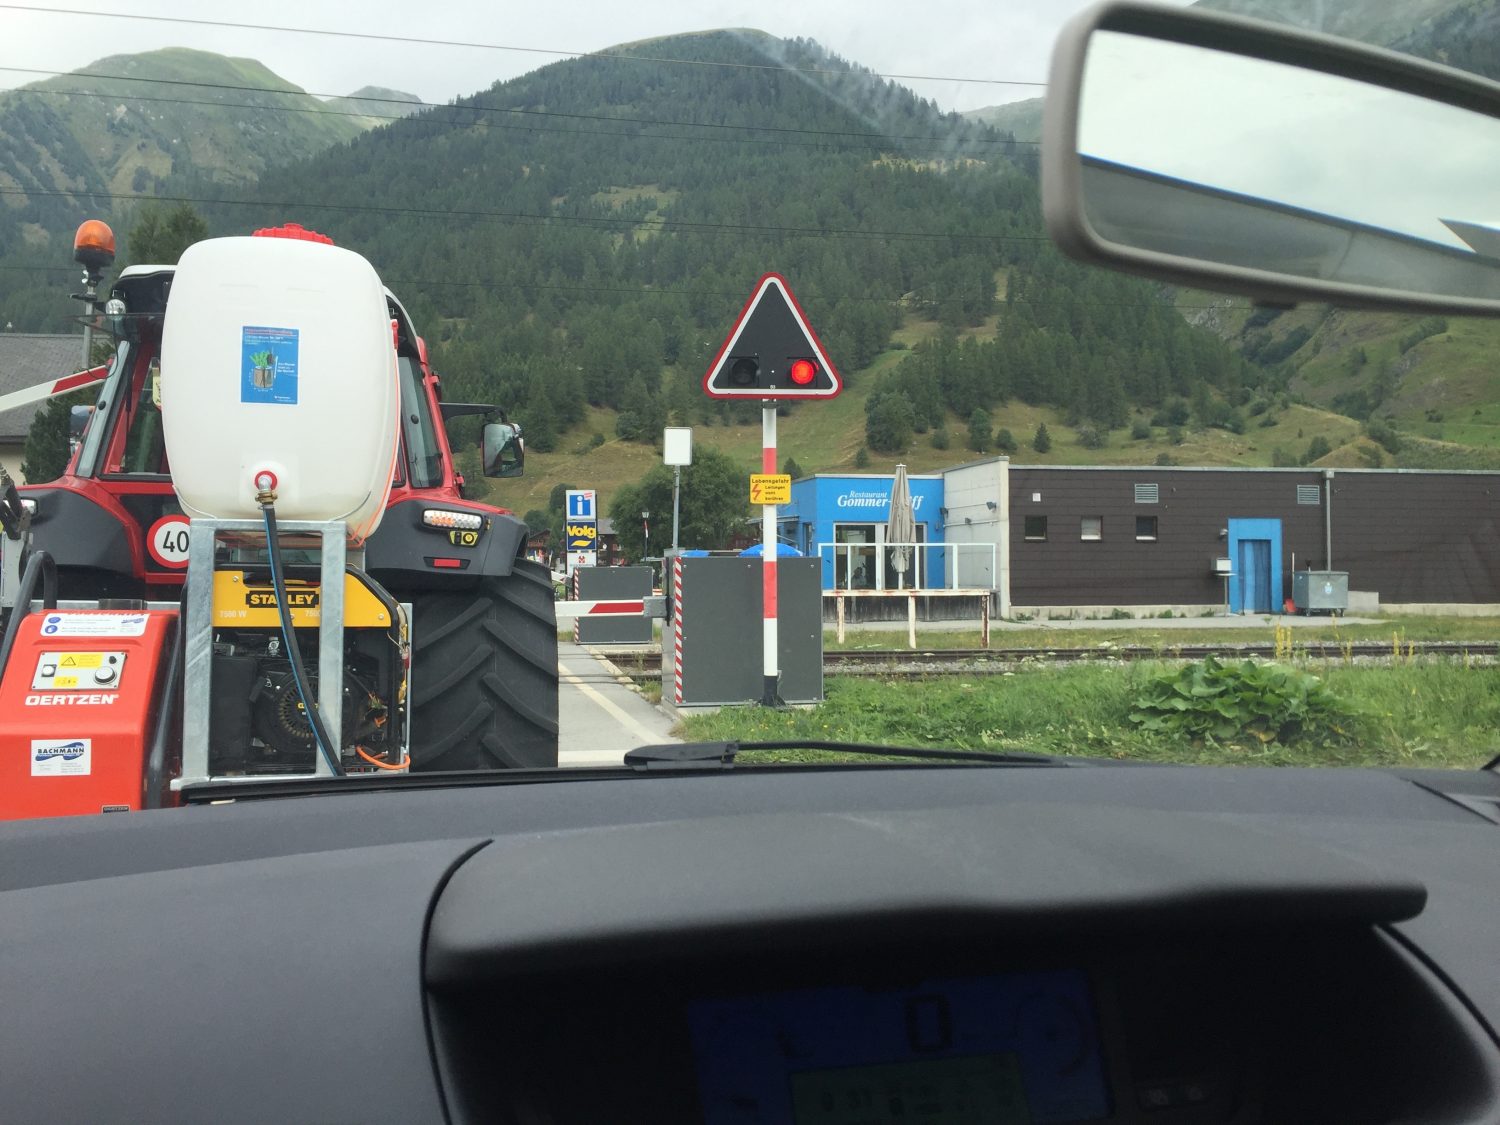 "Traffic" at Obergoms. We've passed lots of small 'chocolate-box' towns in our way to Interlaken. A drive through the Nufenenpass (Passo della Novena) and Grimsel Pass in Switzerland.